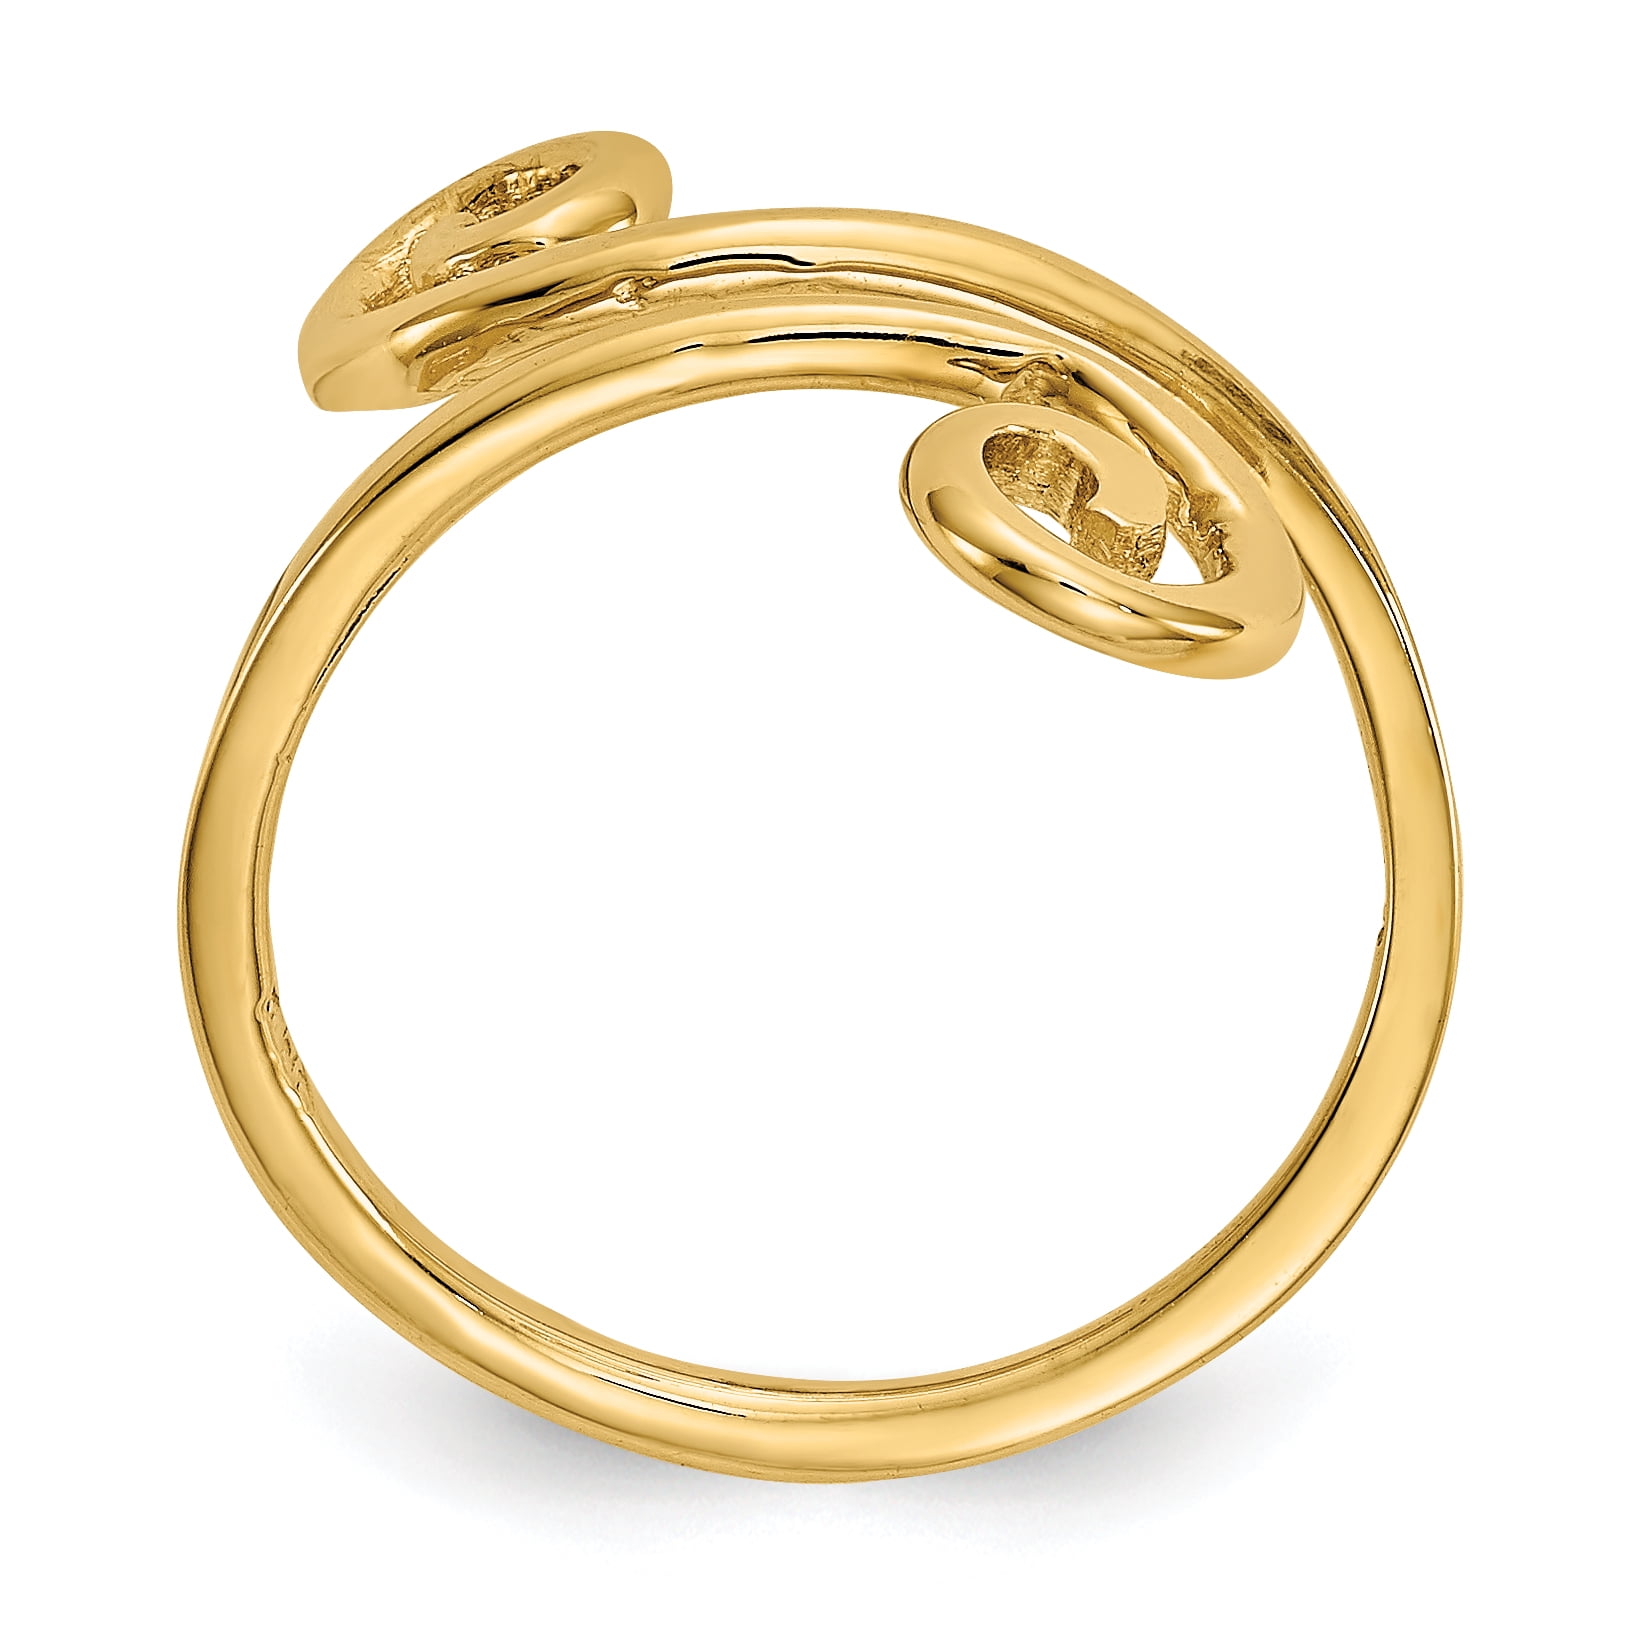 14k Yellow Gold Swirl Adjustable Cute Toe Ring Set Fine Mothers Day Gifts